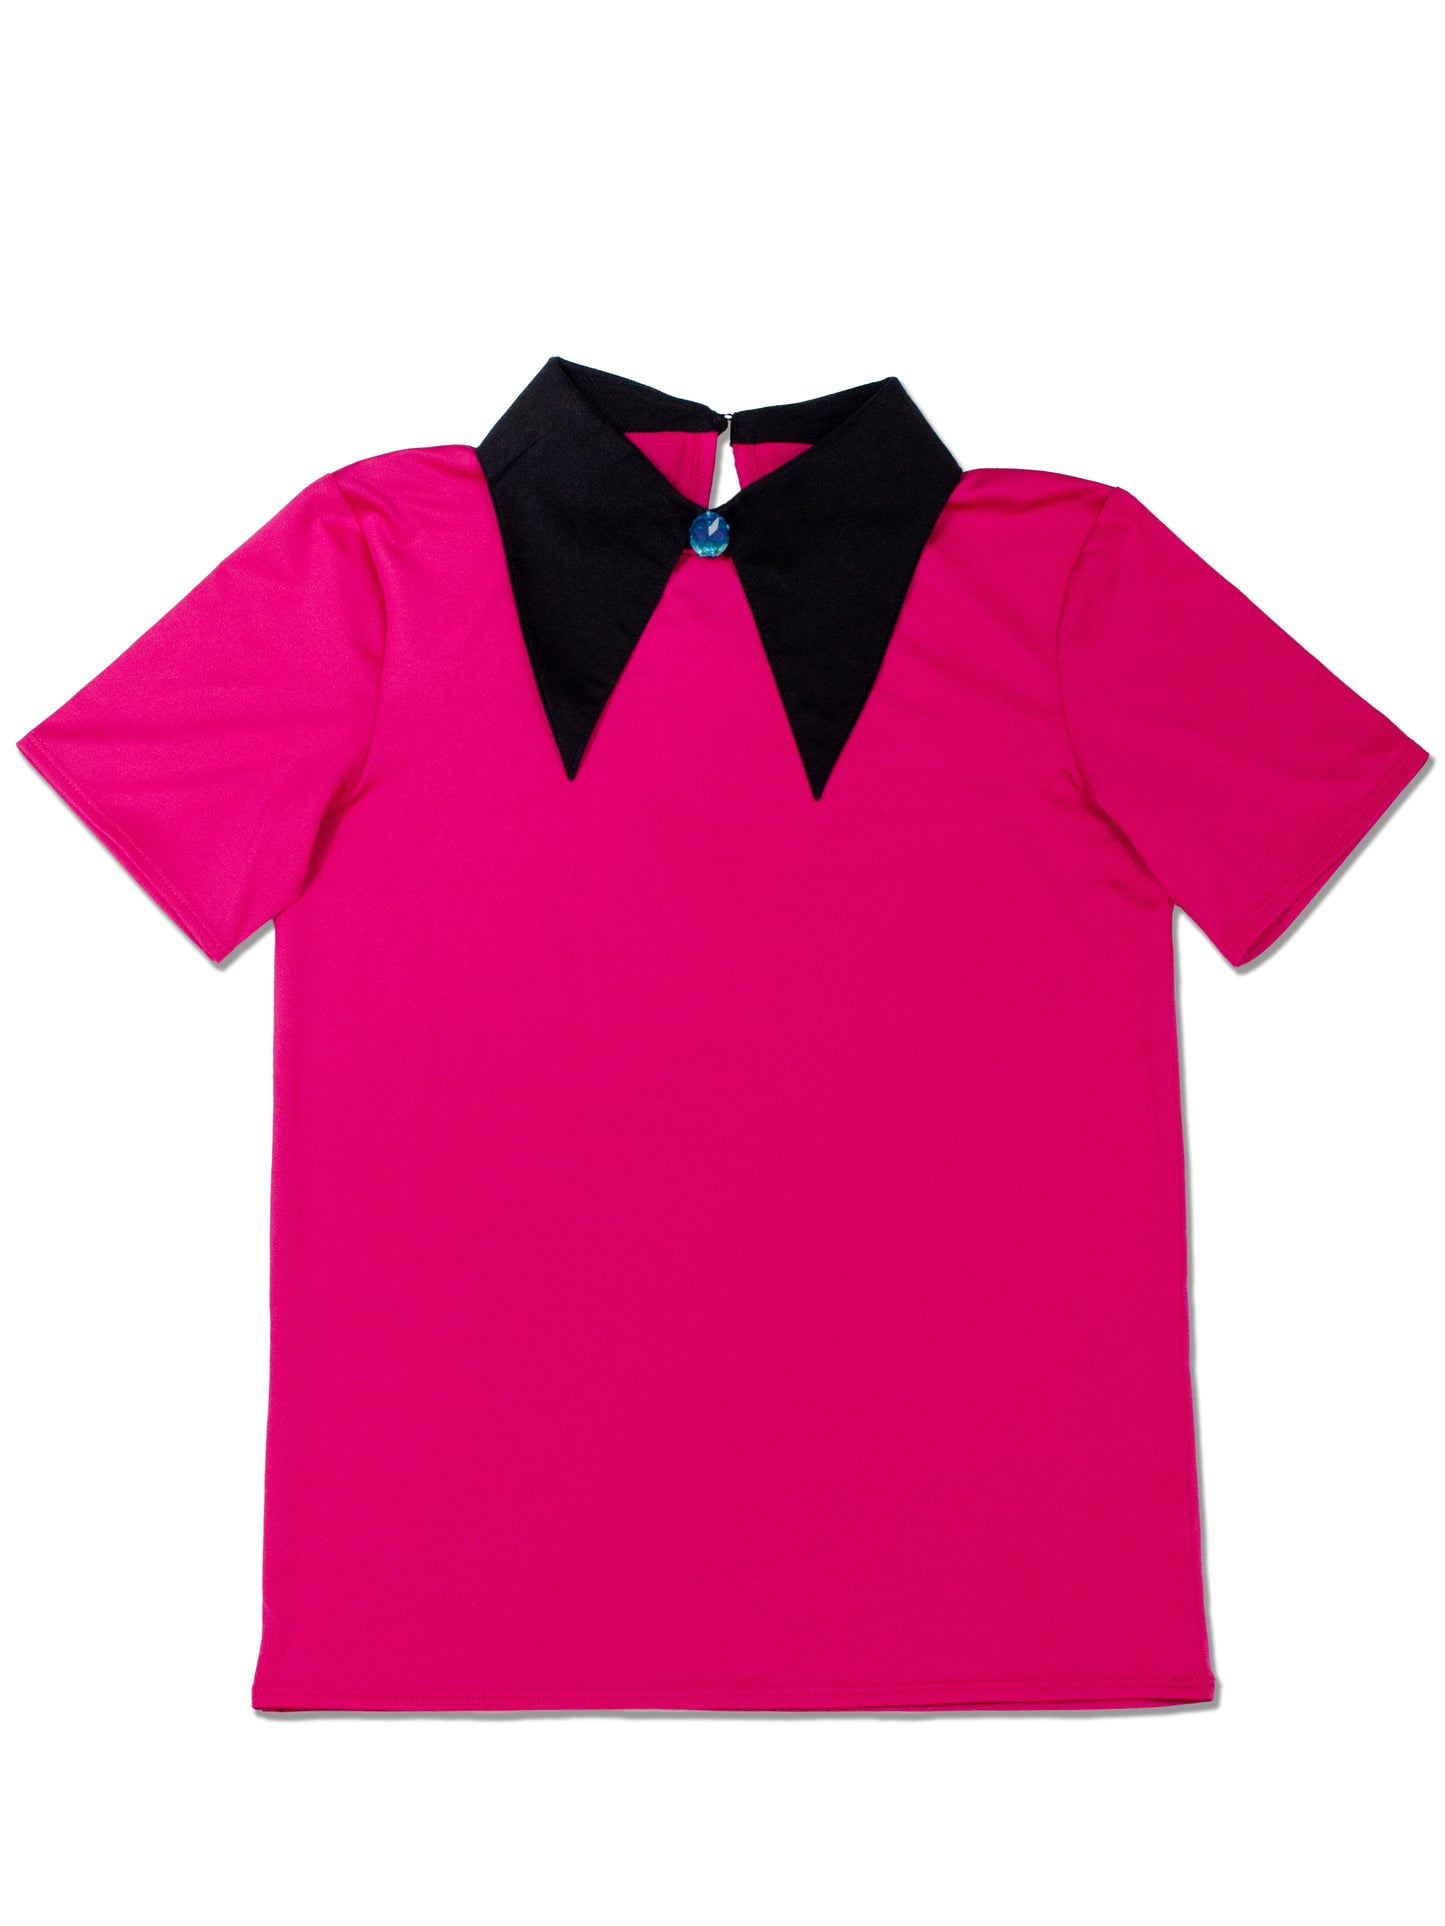 Pointed Collar Top with Rhinestone Button